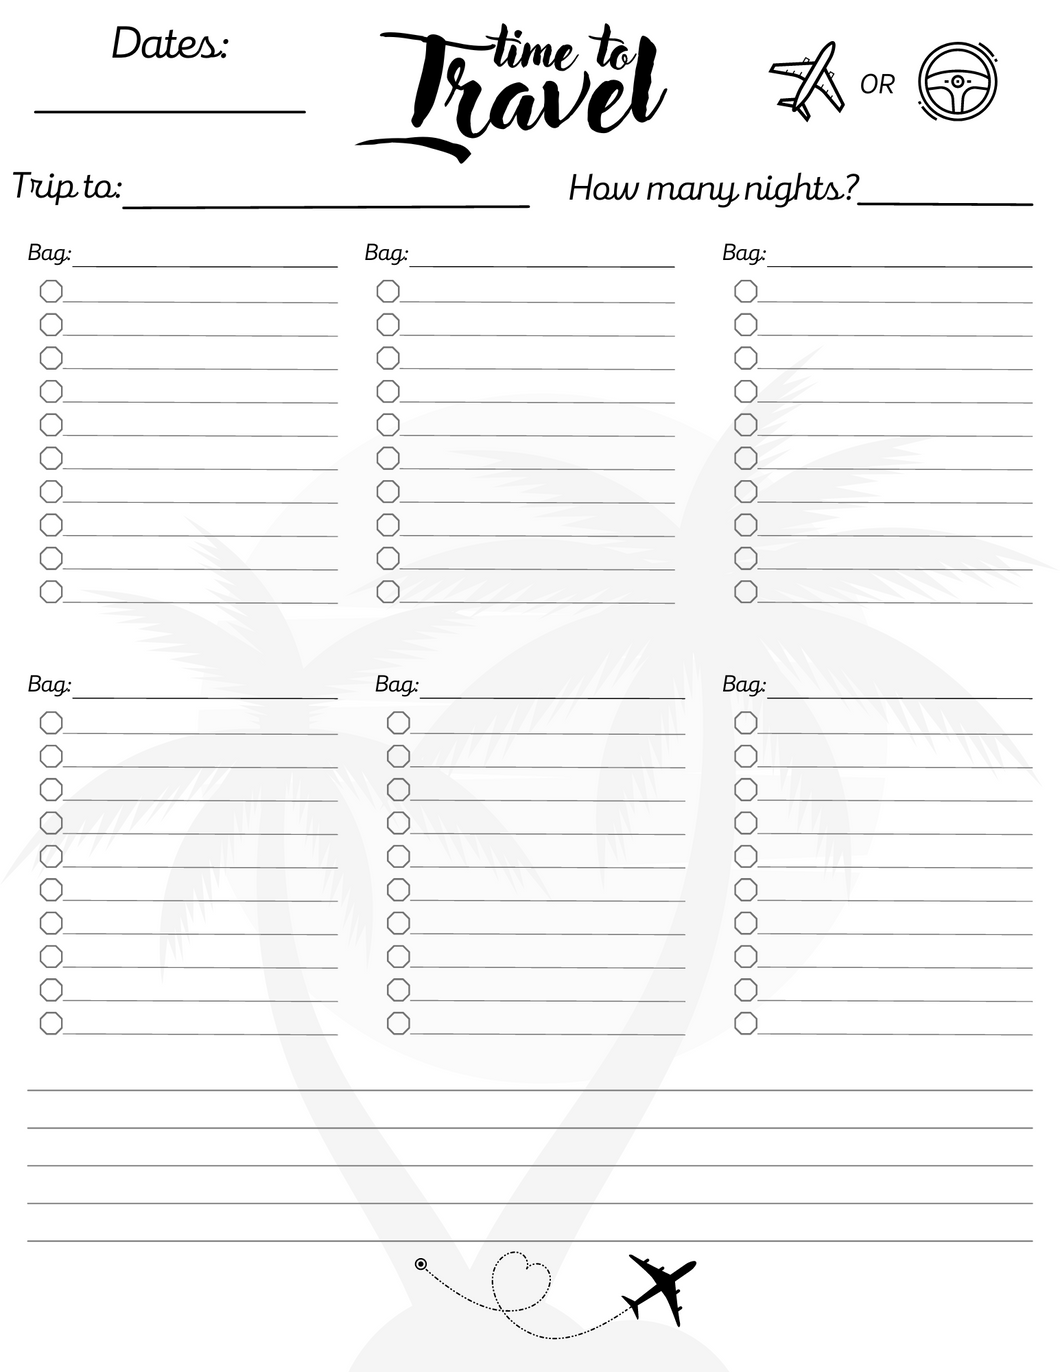 Printable Packing/Travel list with Palms Trees & 6 bag lists - Digital download